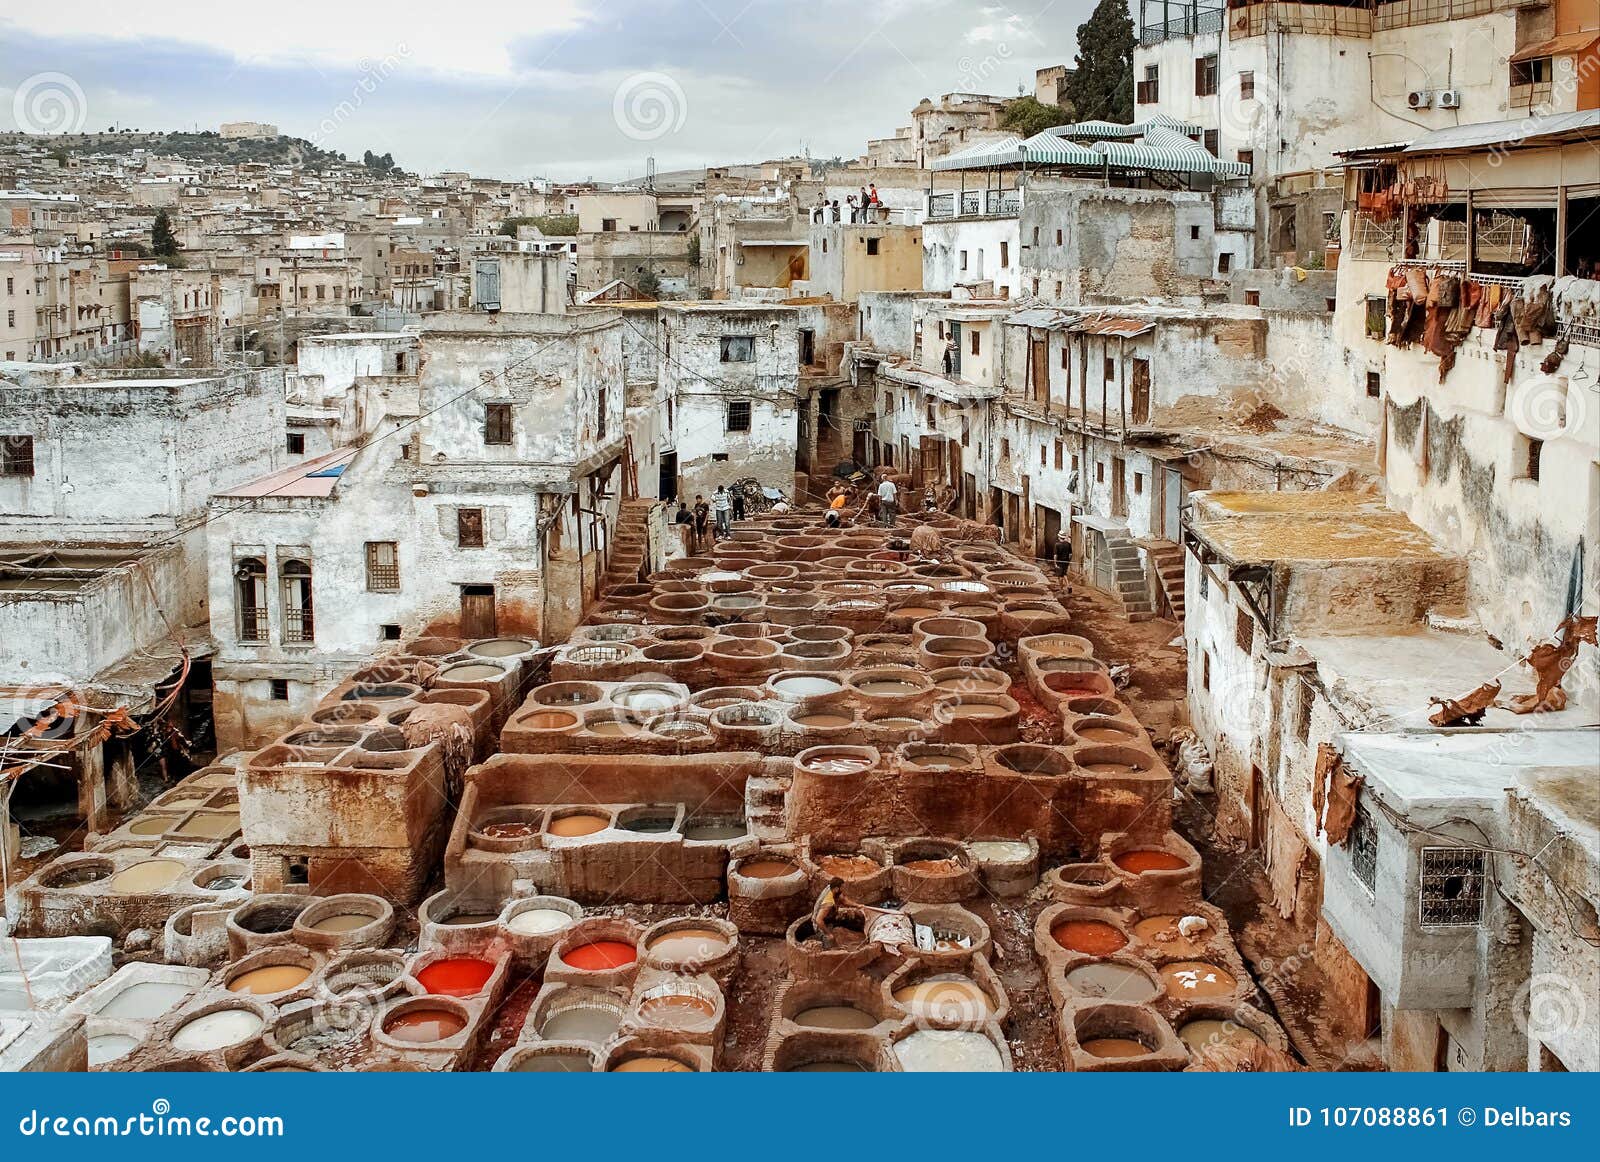 morocco, fez, the old city. workers paint the skin in dyers. medina.